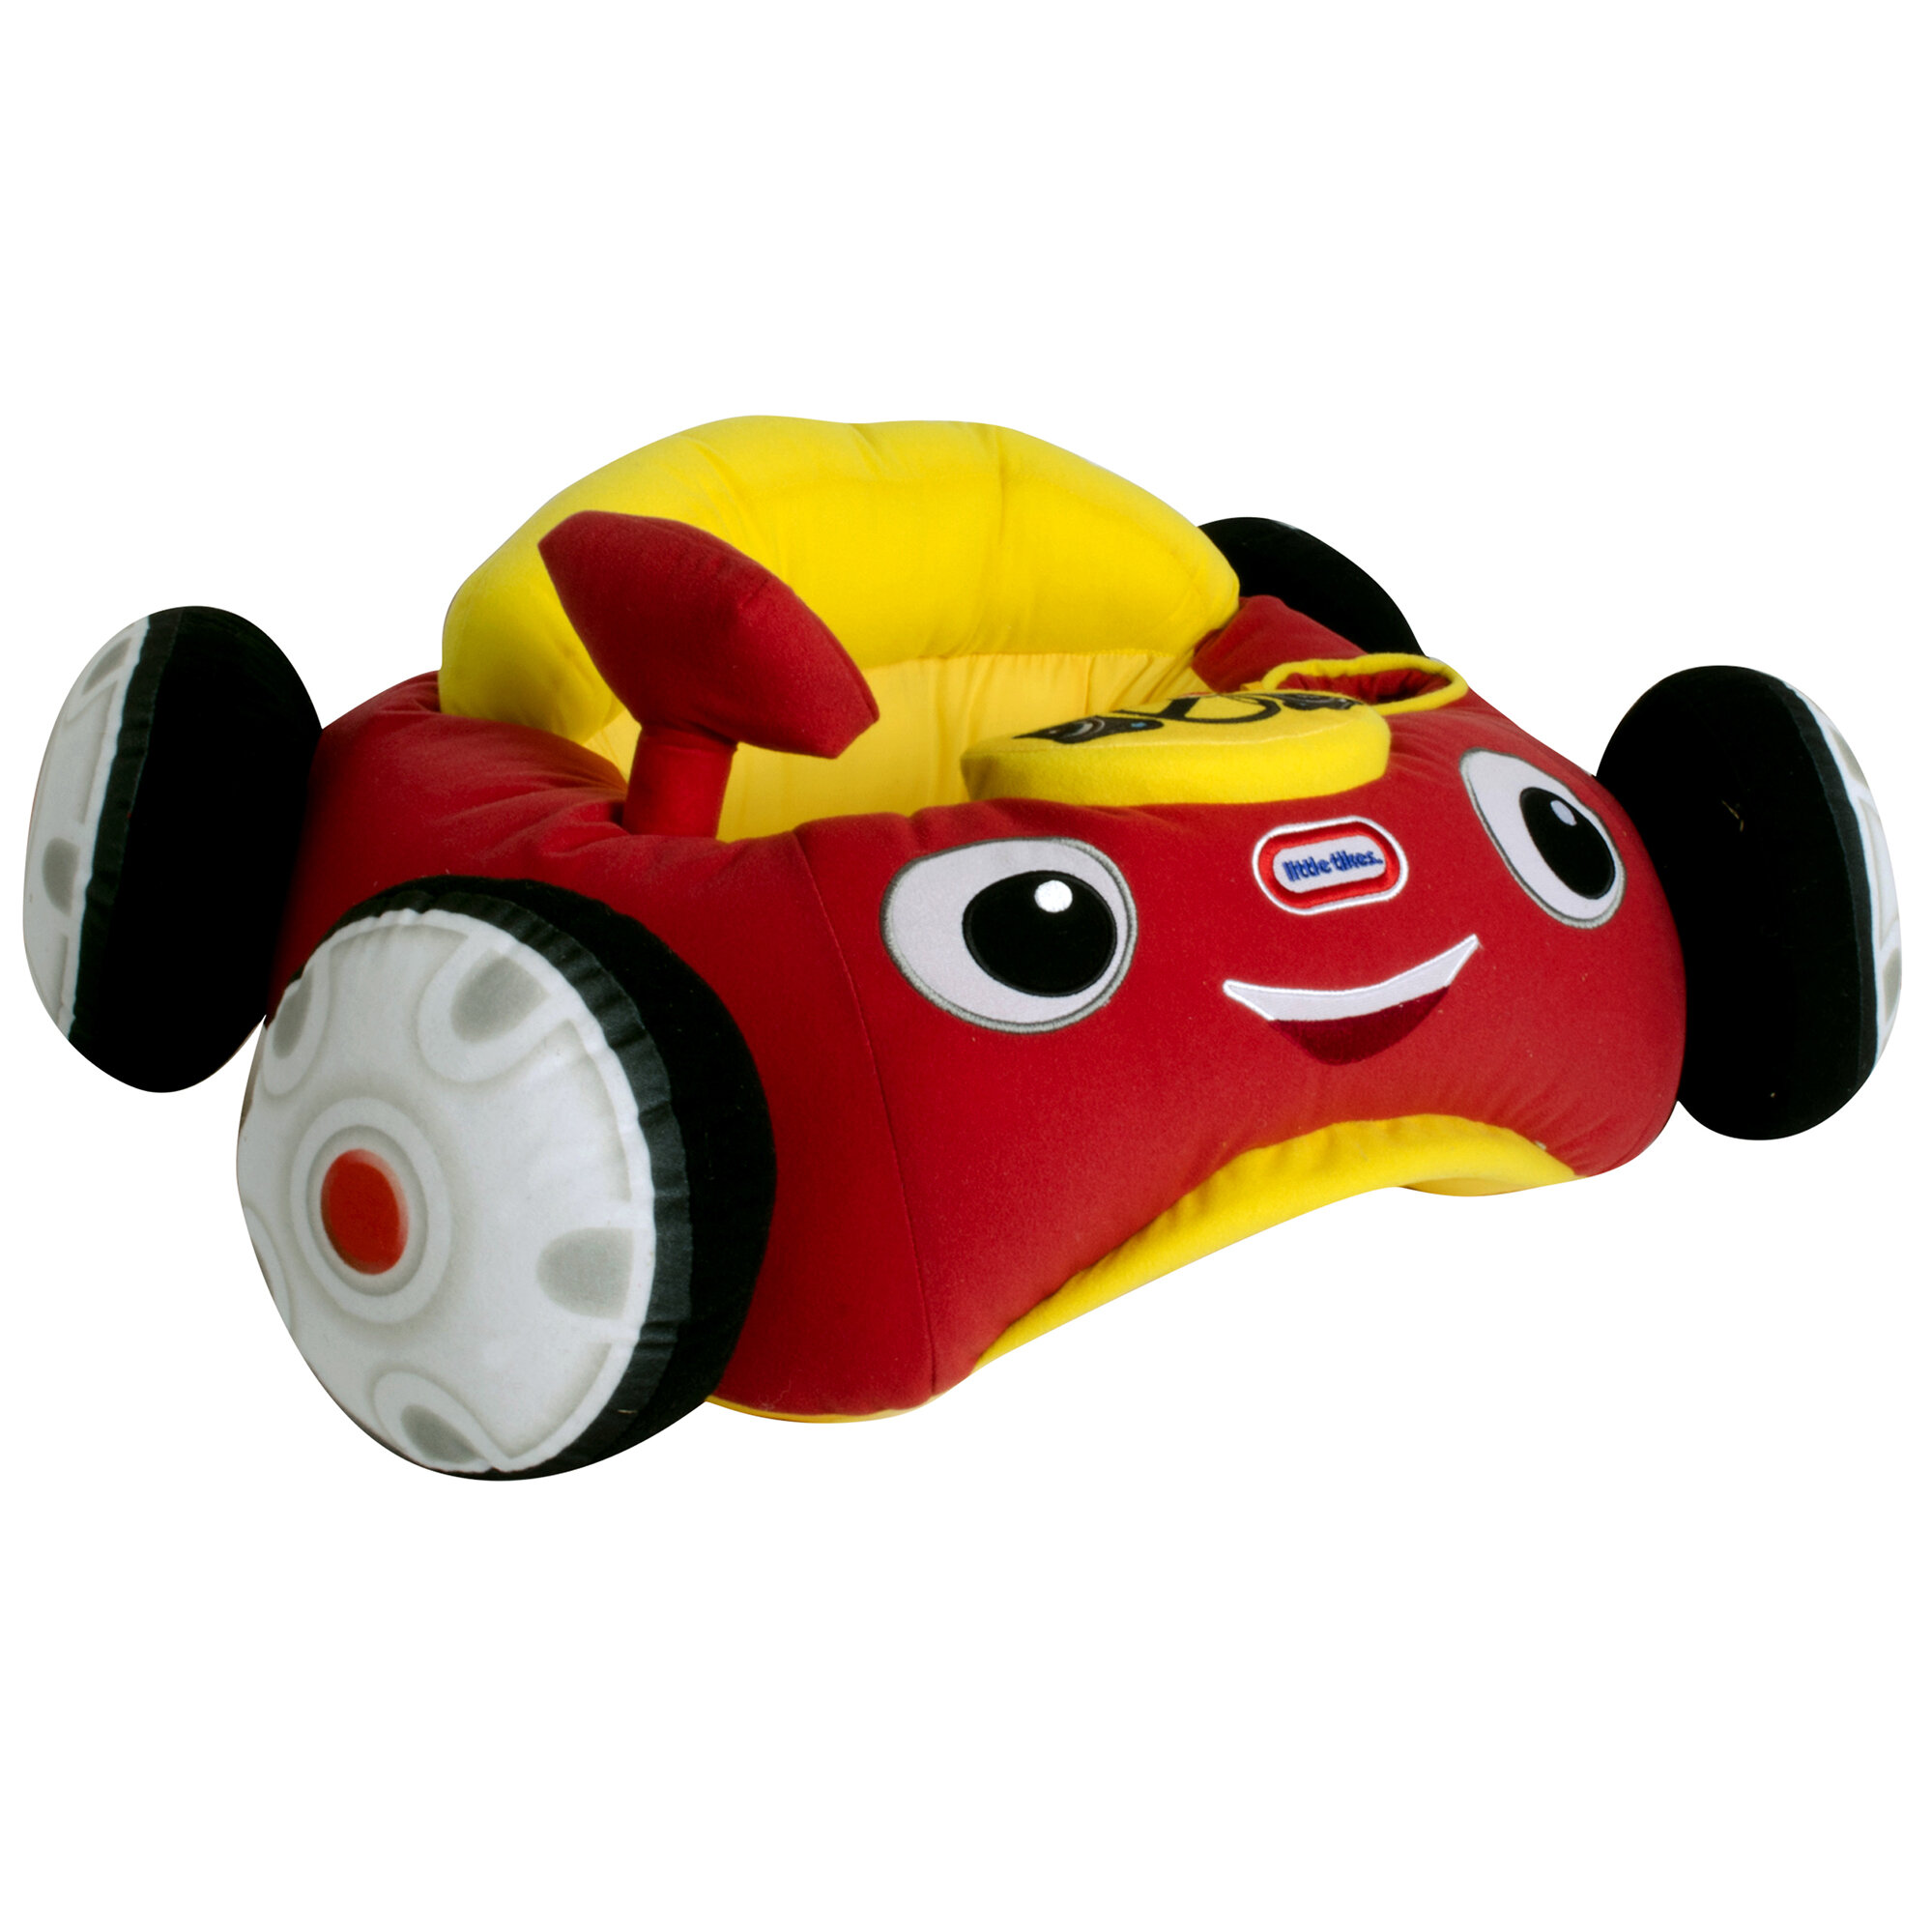 Little Cozy Coupe Plush Baby Toddler Novelty Cup Holder Wayfair